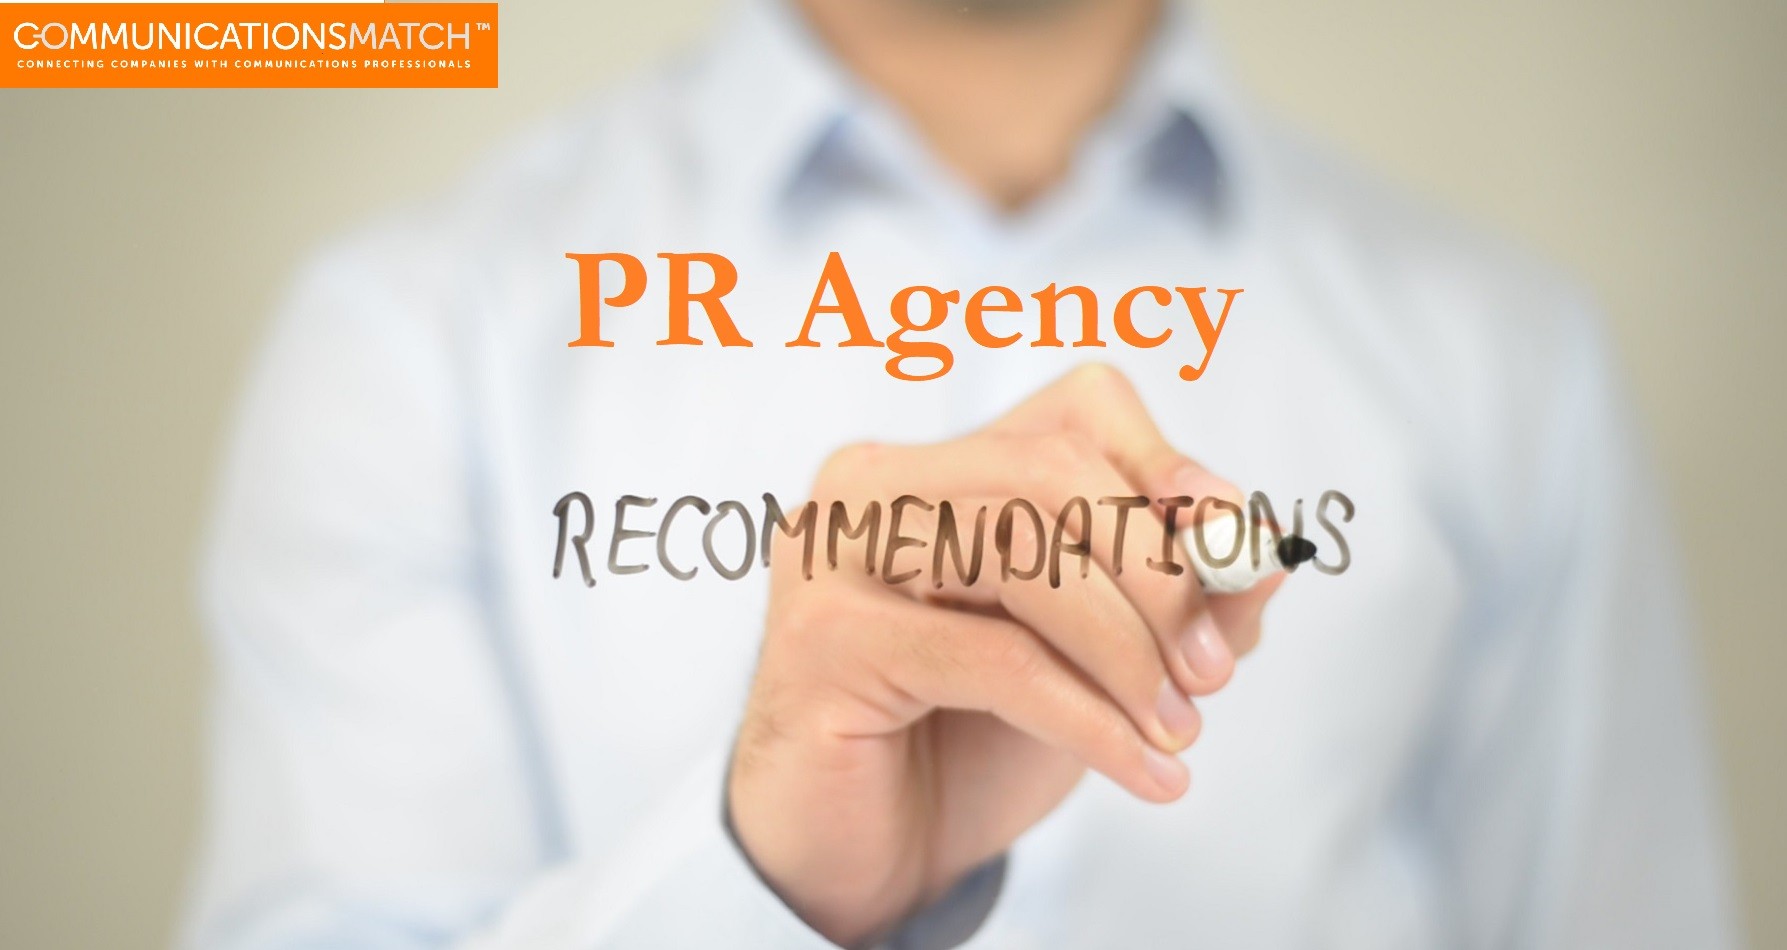 Recommended PR Agencies